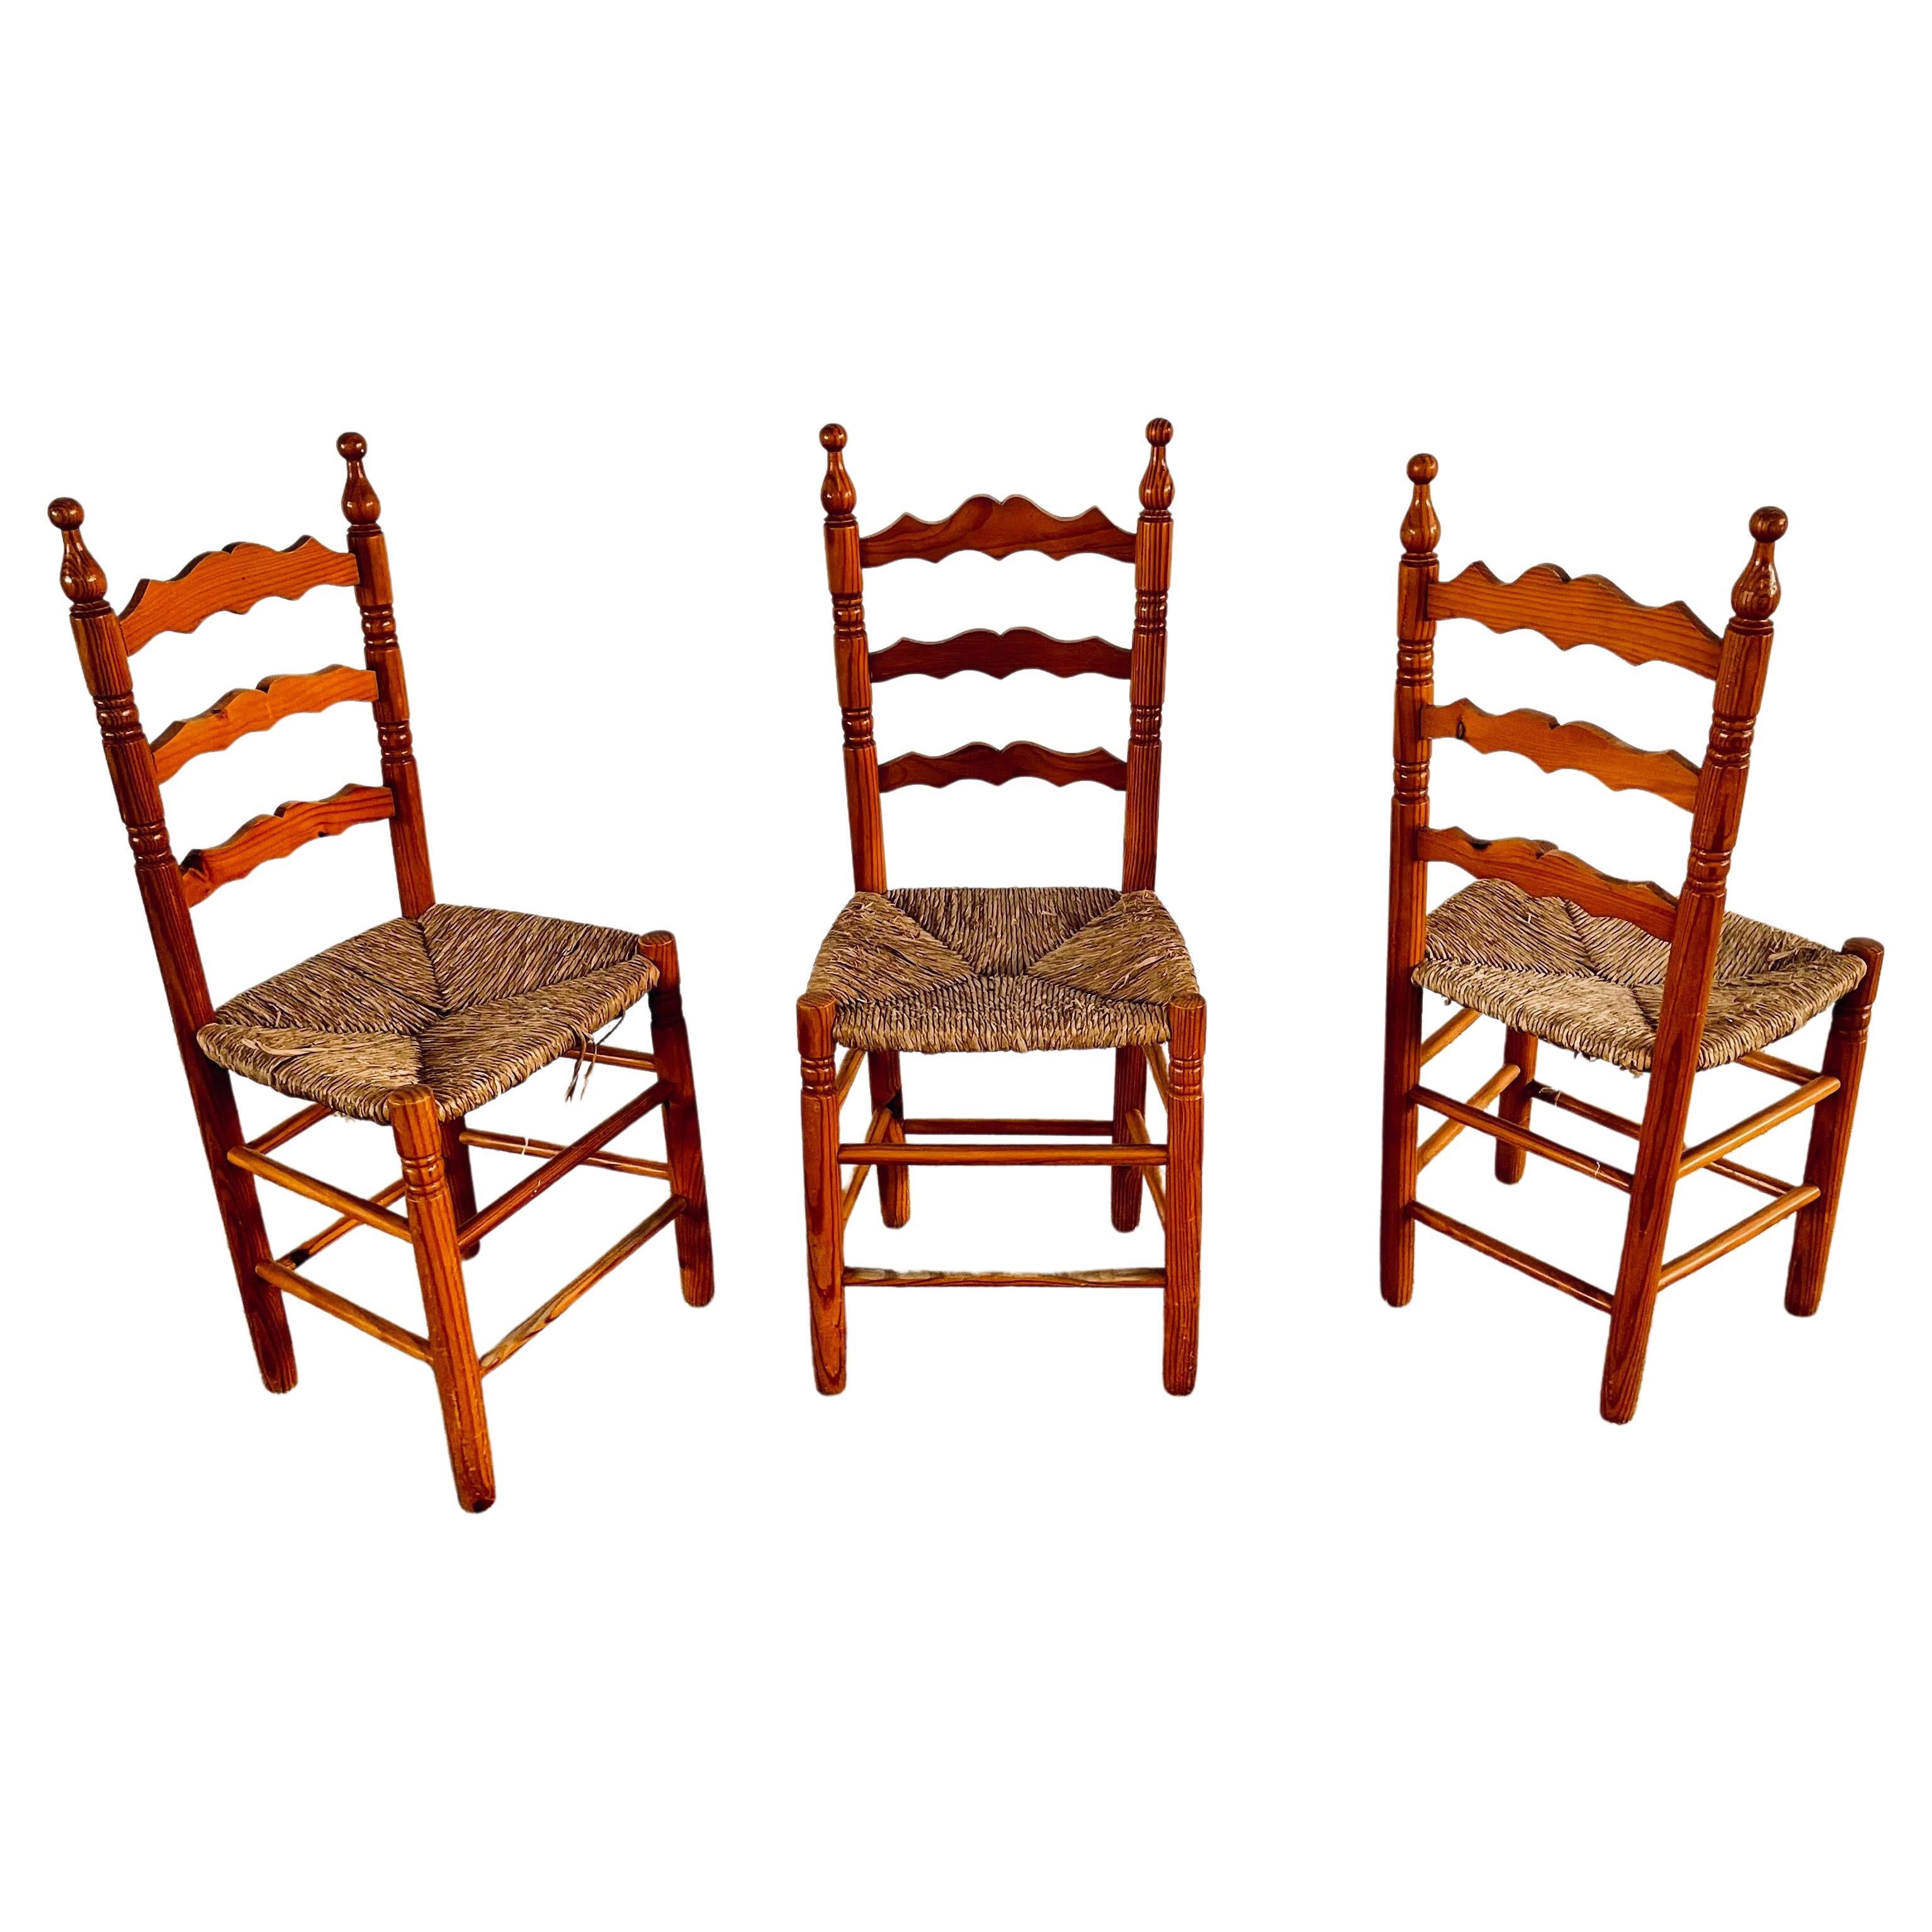 Vintage Spanish Rush Seat Chair, Wicker and turned wood Castillian Chair For Sale